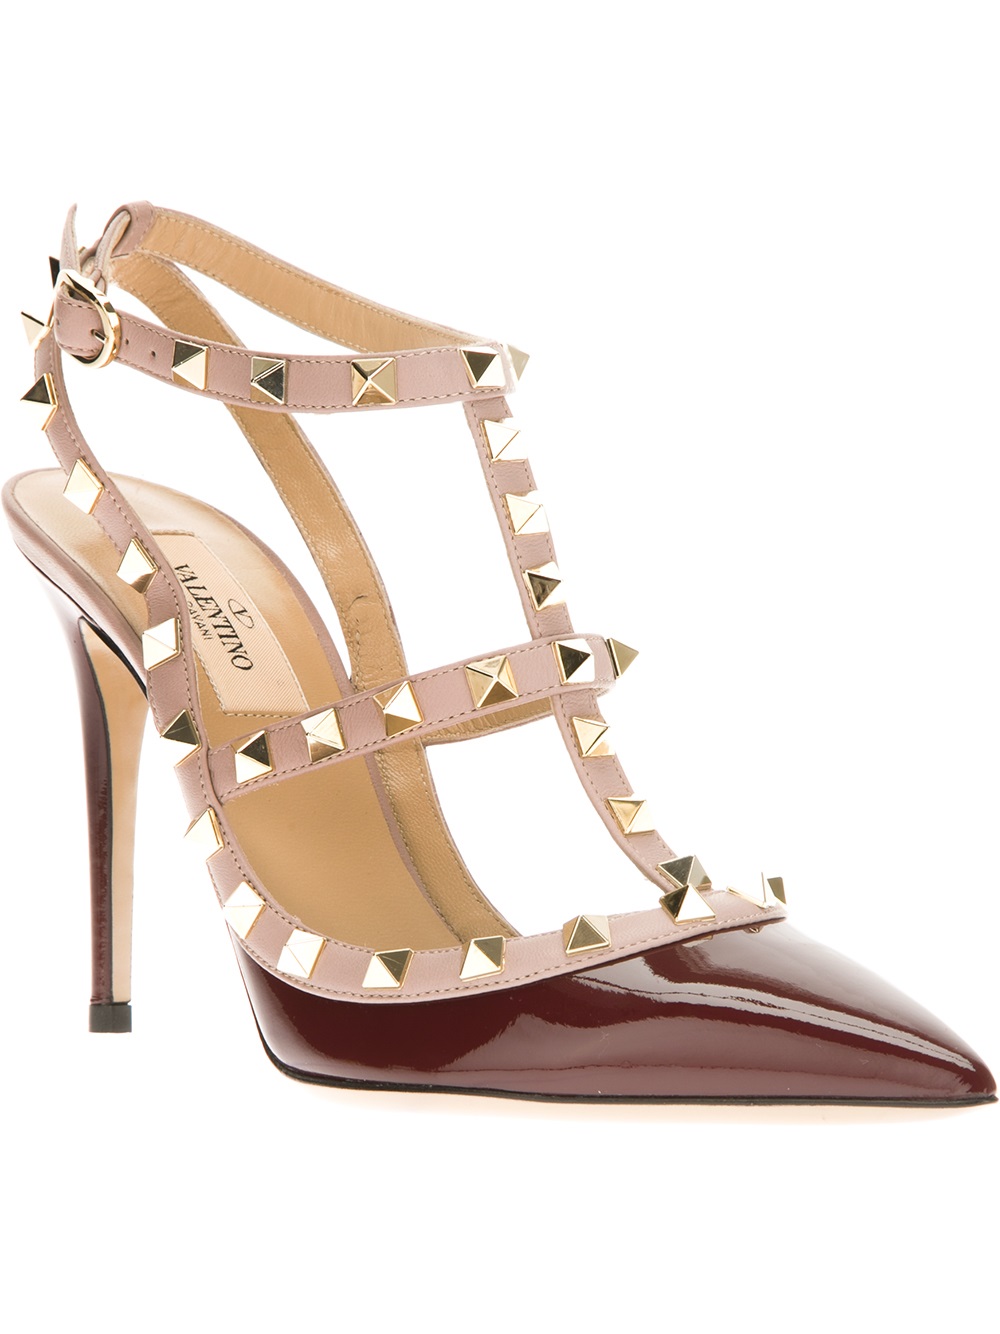 Lyst - Valentino Studded Sandal in Red